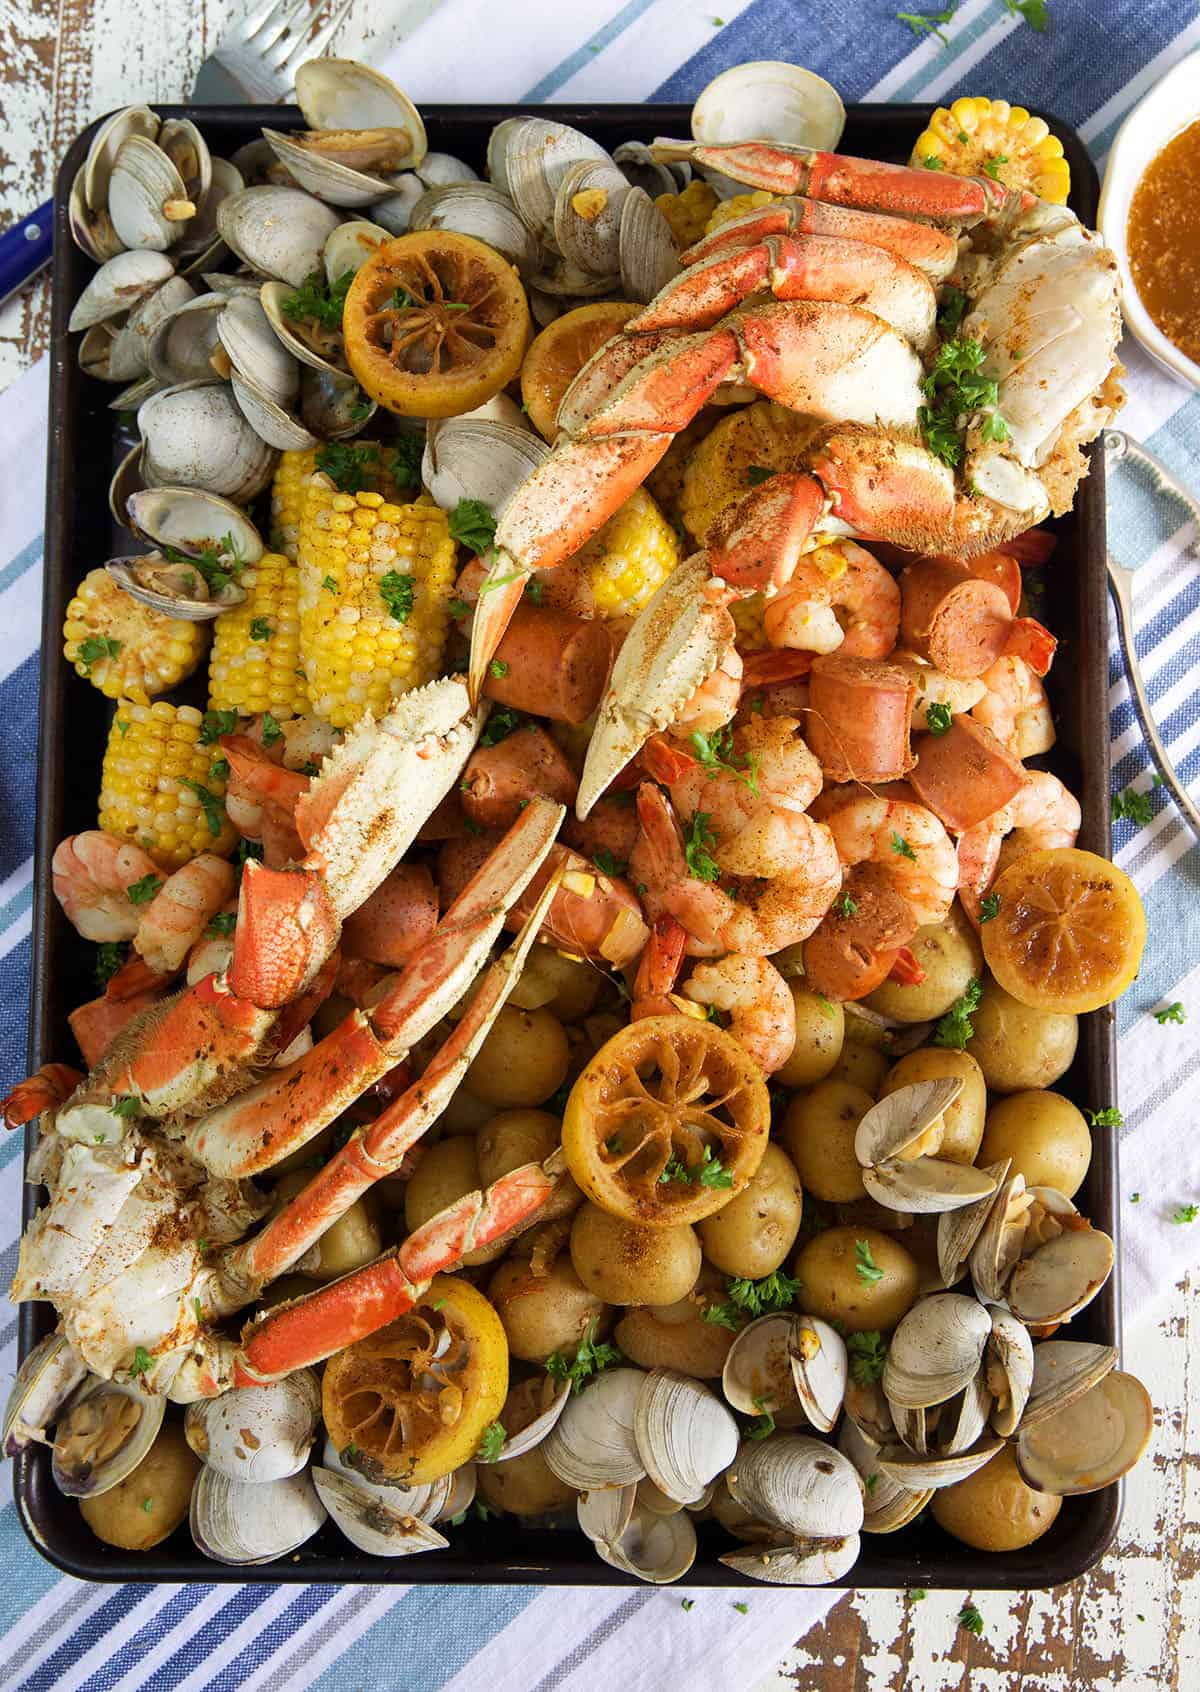 Crab legs, shrimp, clams, corn and potatoes are all boiled and placed on a serving platter.